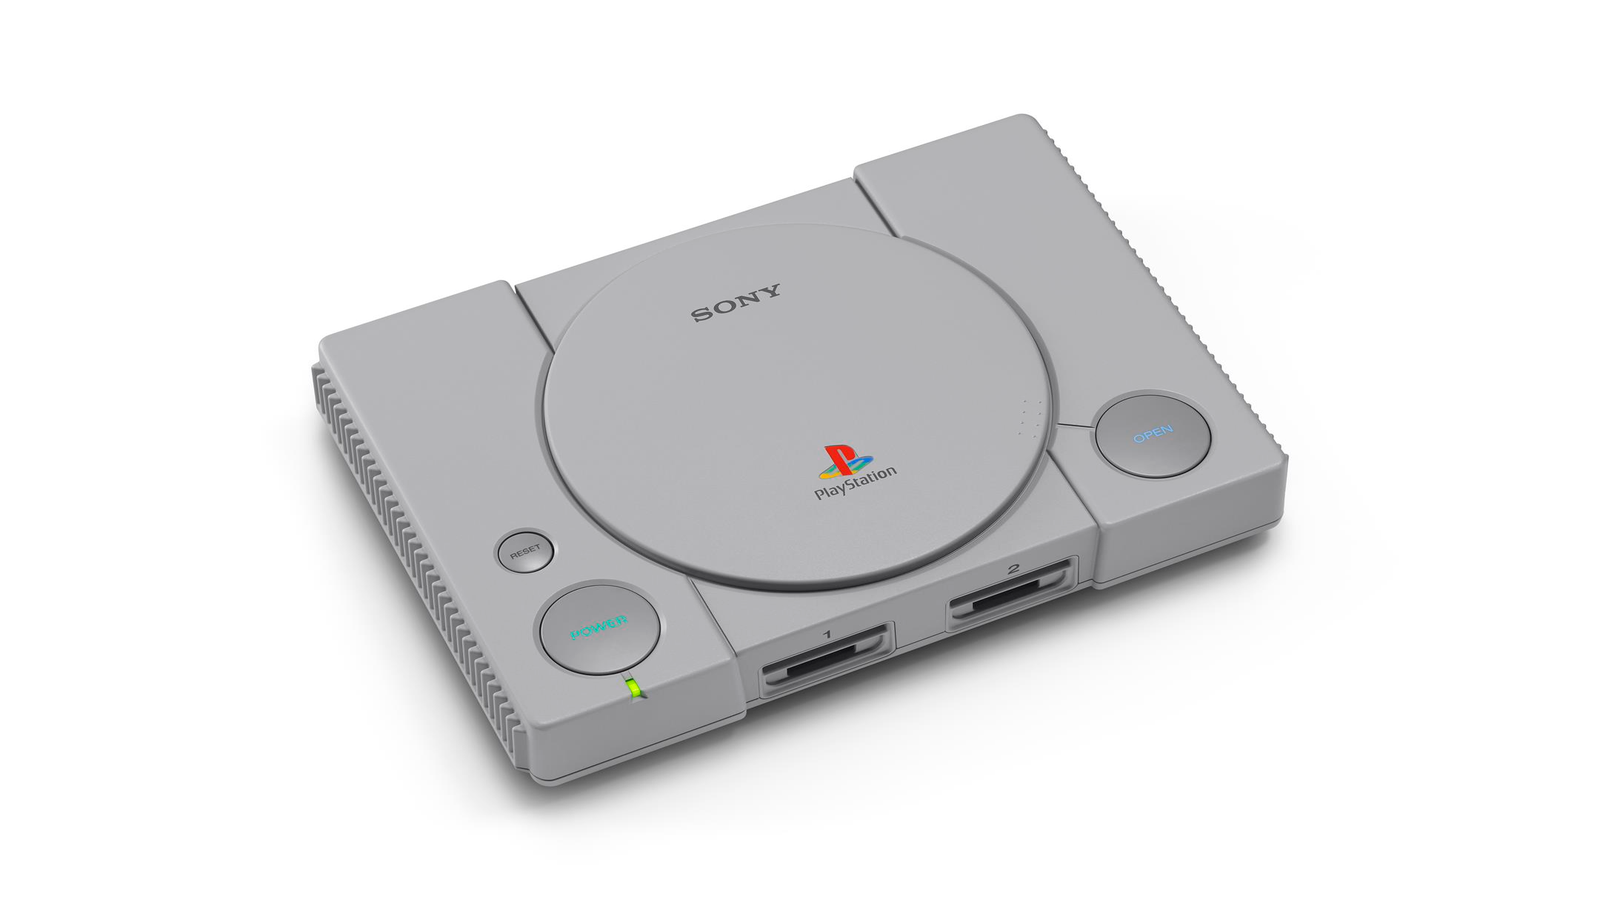 PlayStation Classic full games list: Metal Gear Solid, GTA and